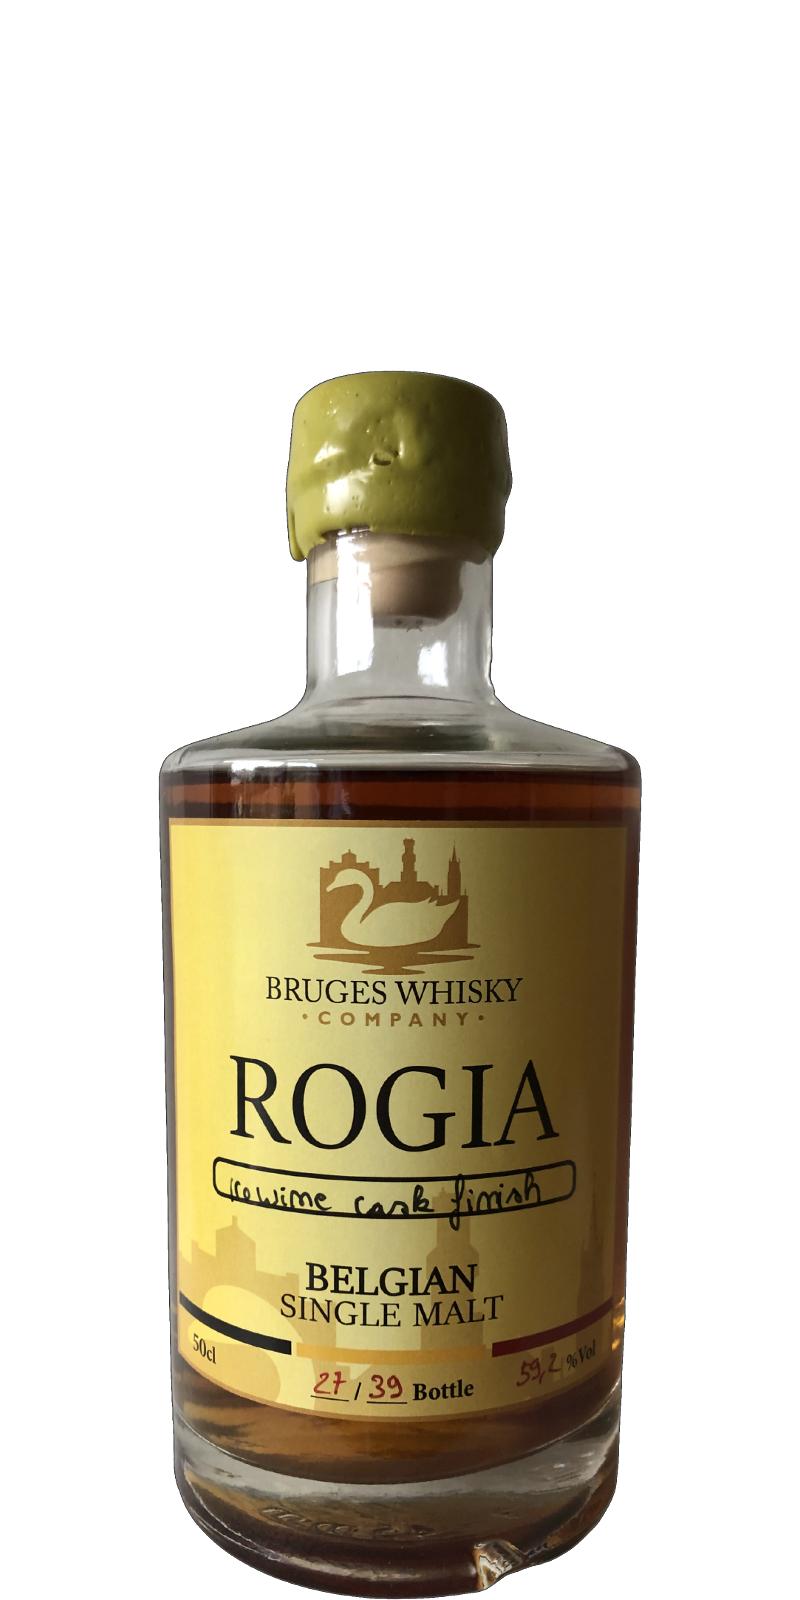 Bruges Whisky Company Rogia